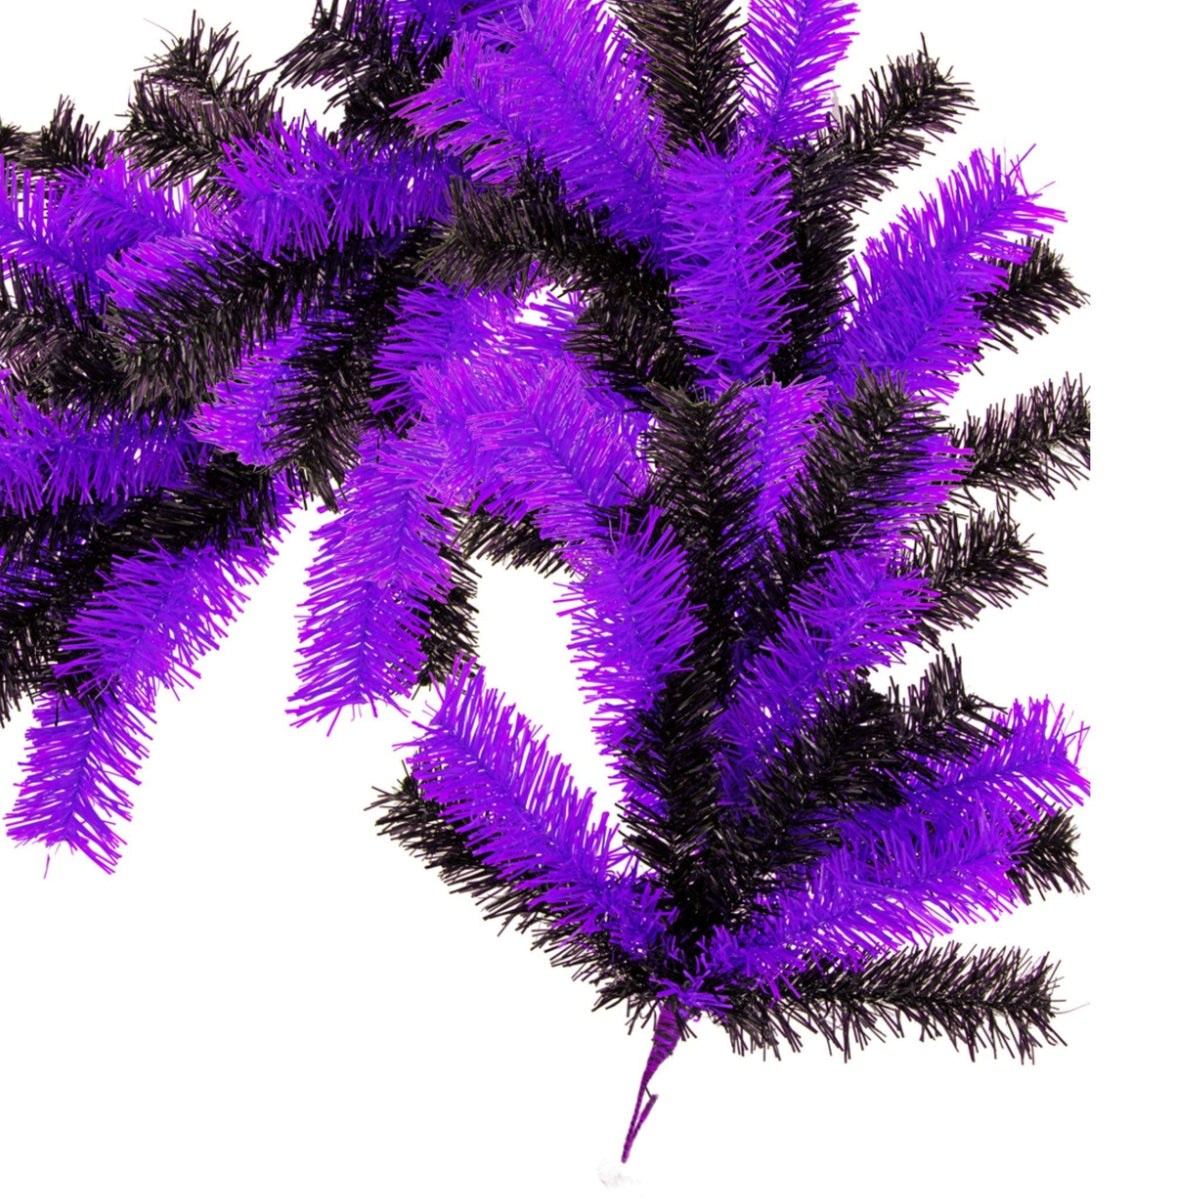 Shop for Lee Display's brand new 6FT Shiny Metallic Purple and Black Tinsel Brush Garlands on sale now at leedisplay.com.  End with wire